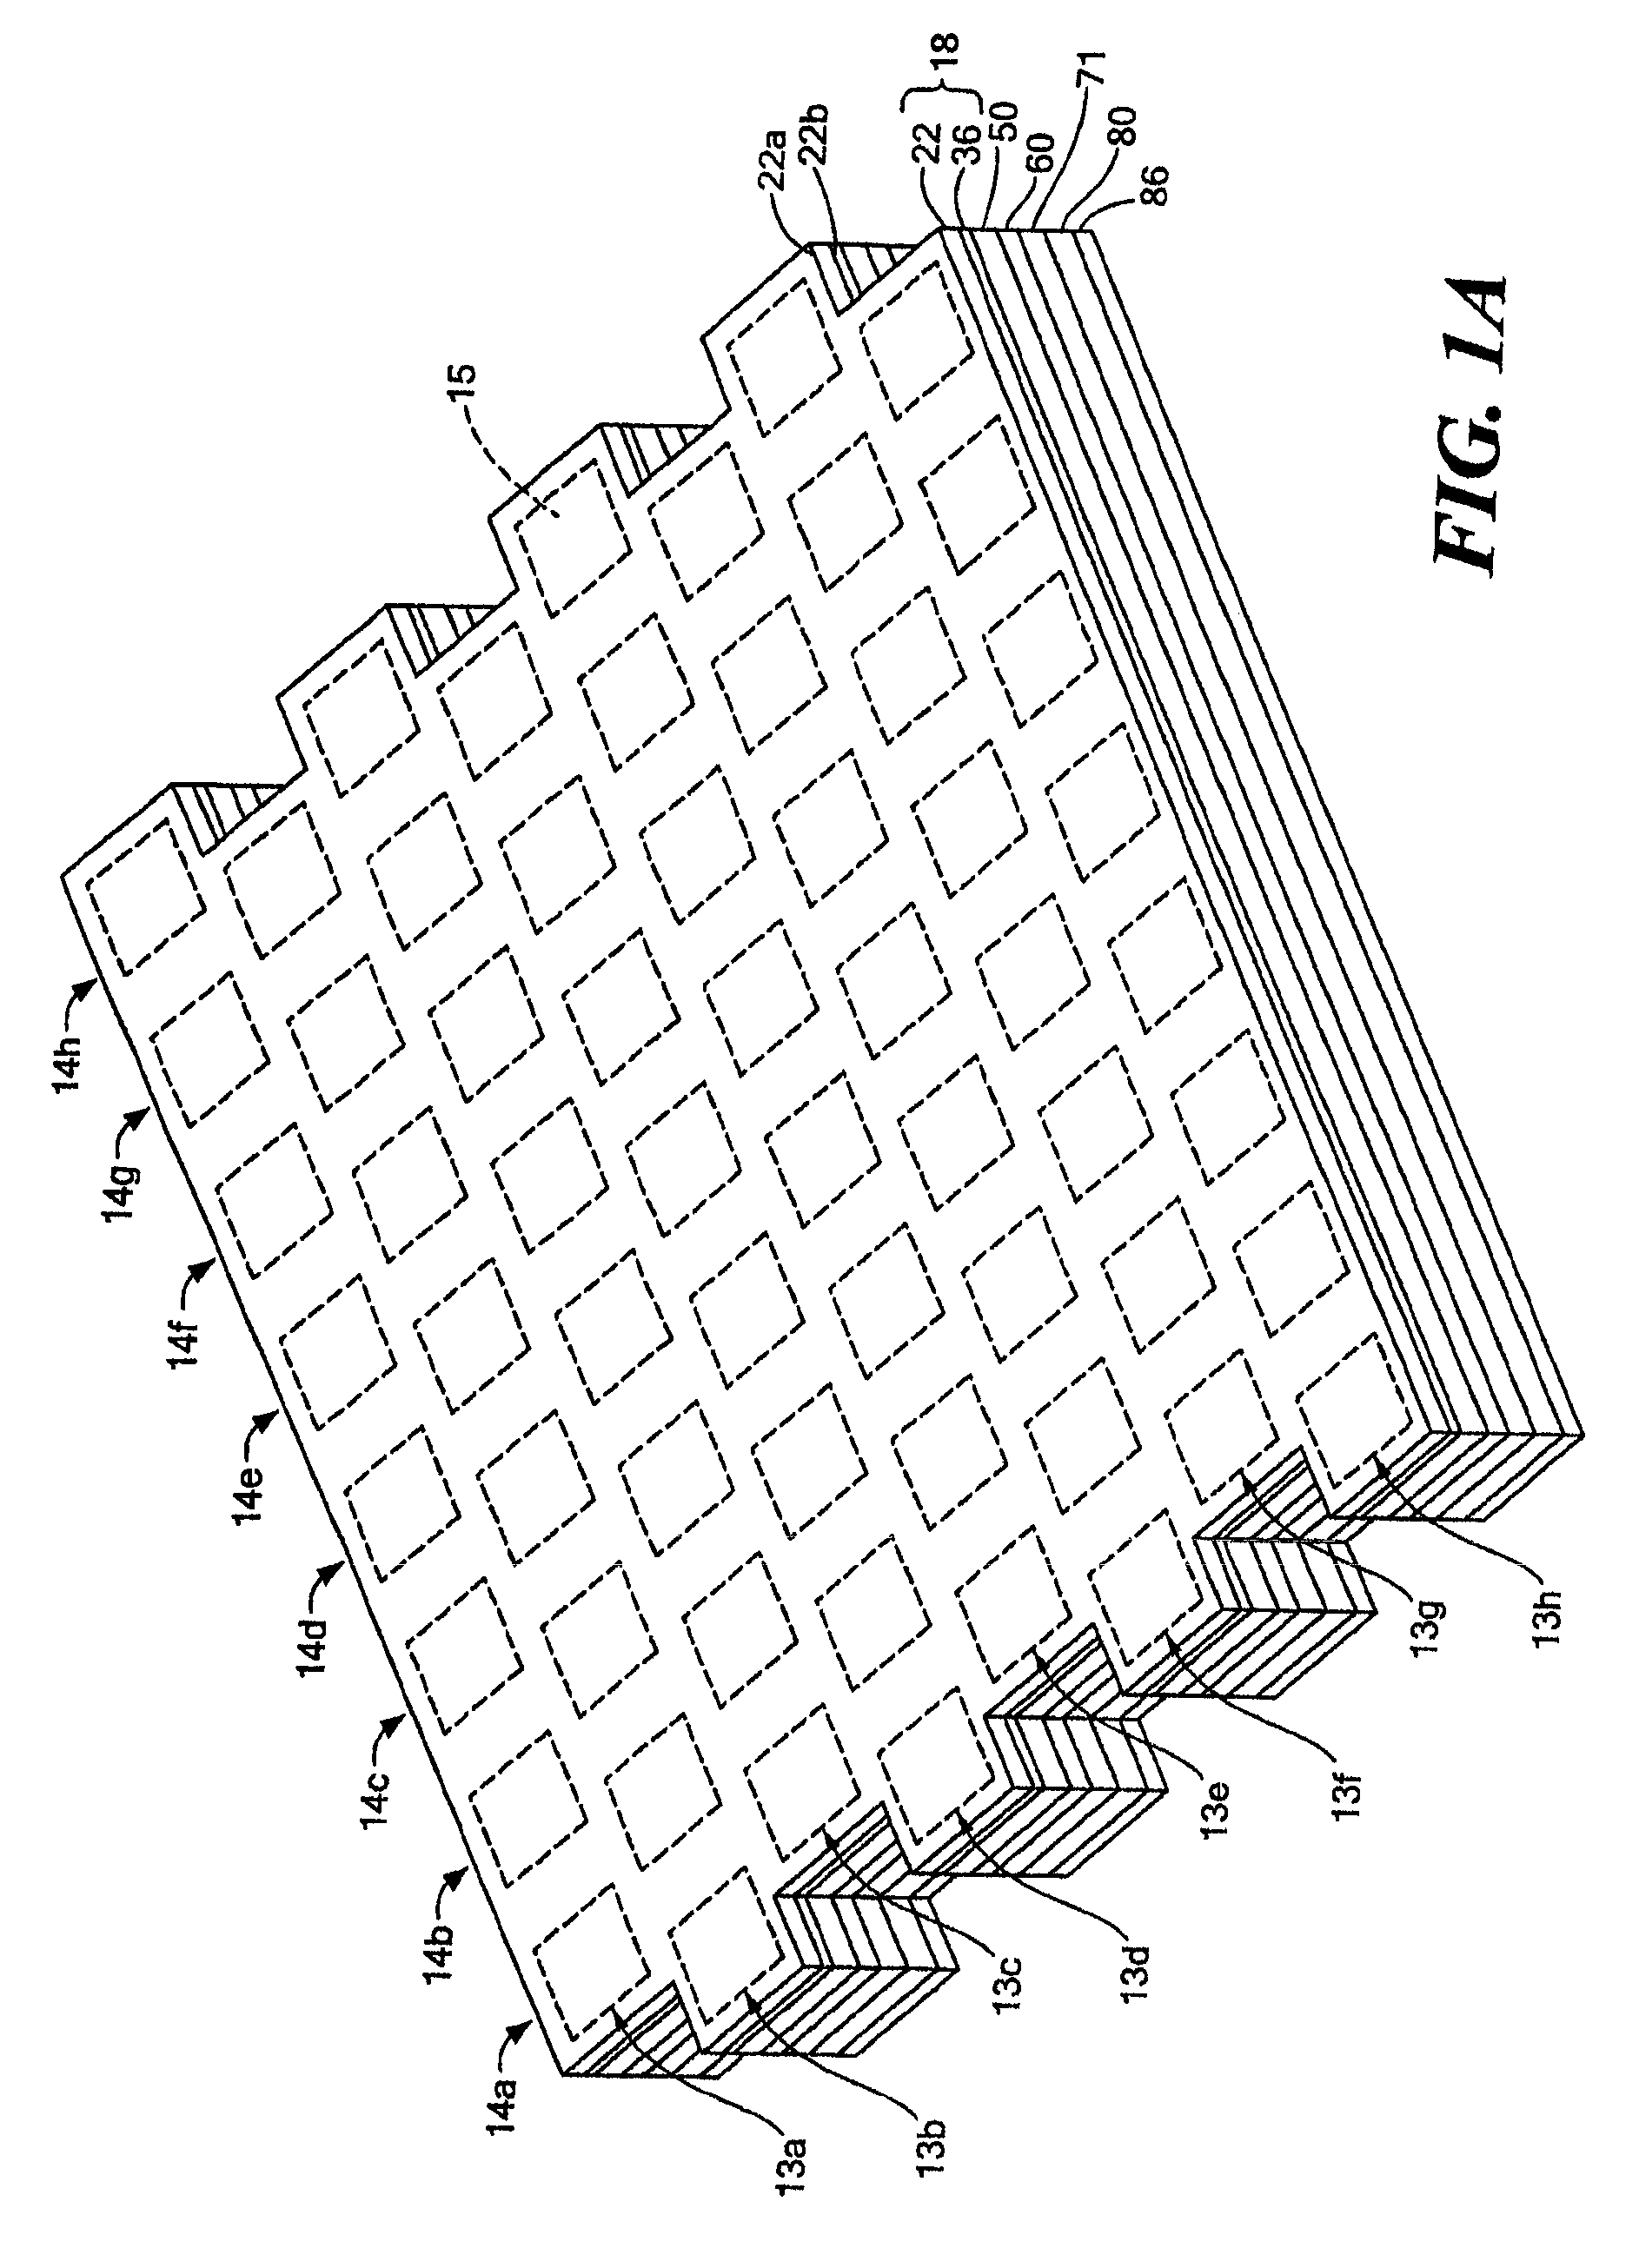 Tile sub-array and related circuits and techniques